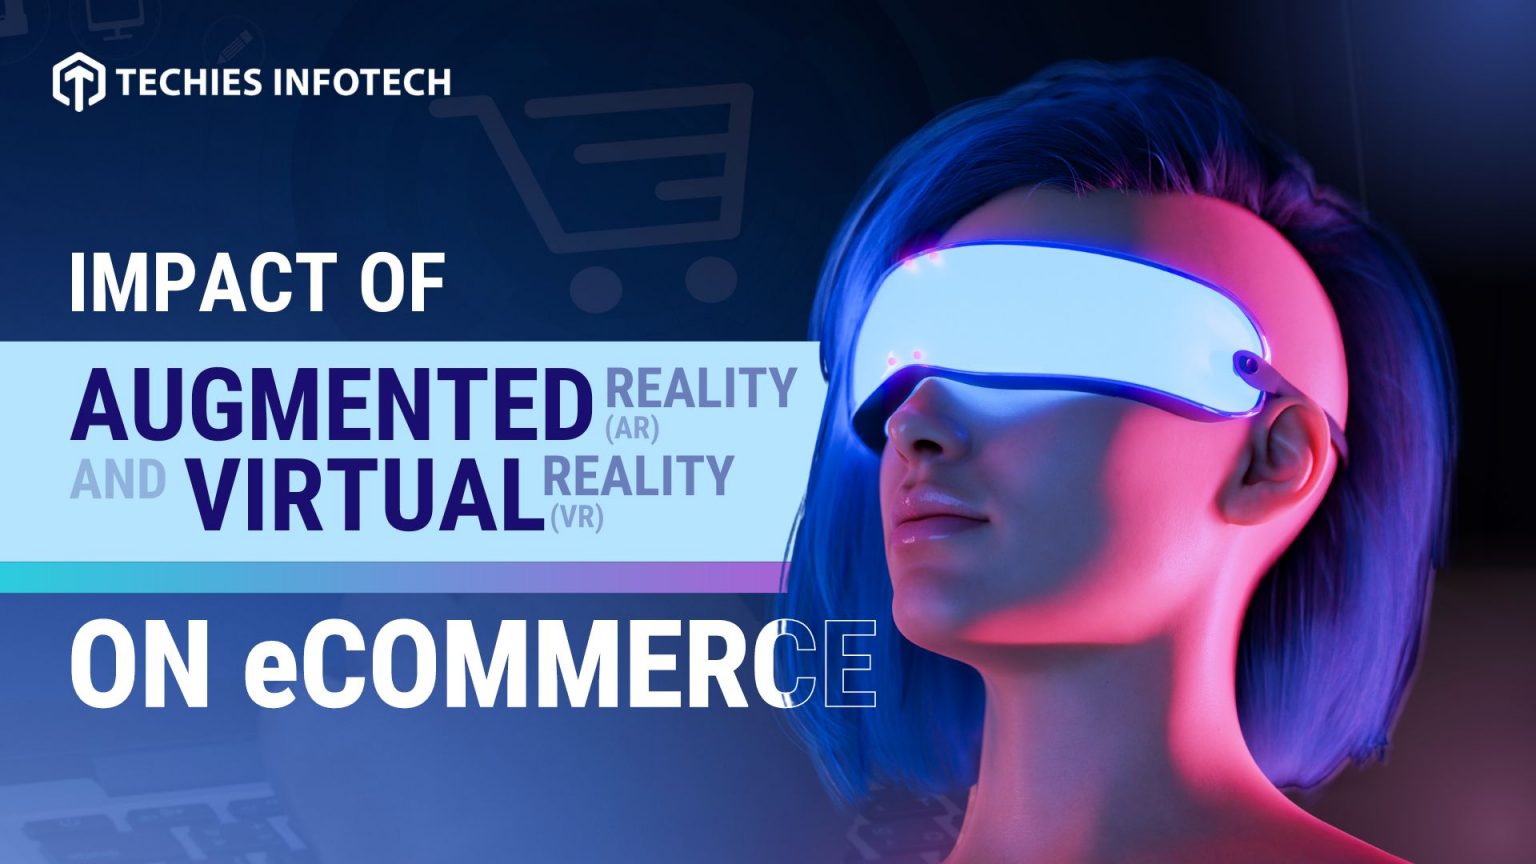 The Impact of AR and VR on eCommerce